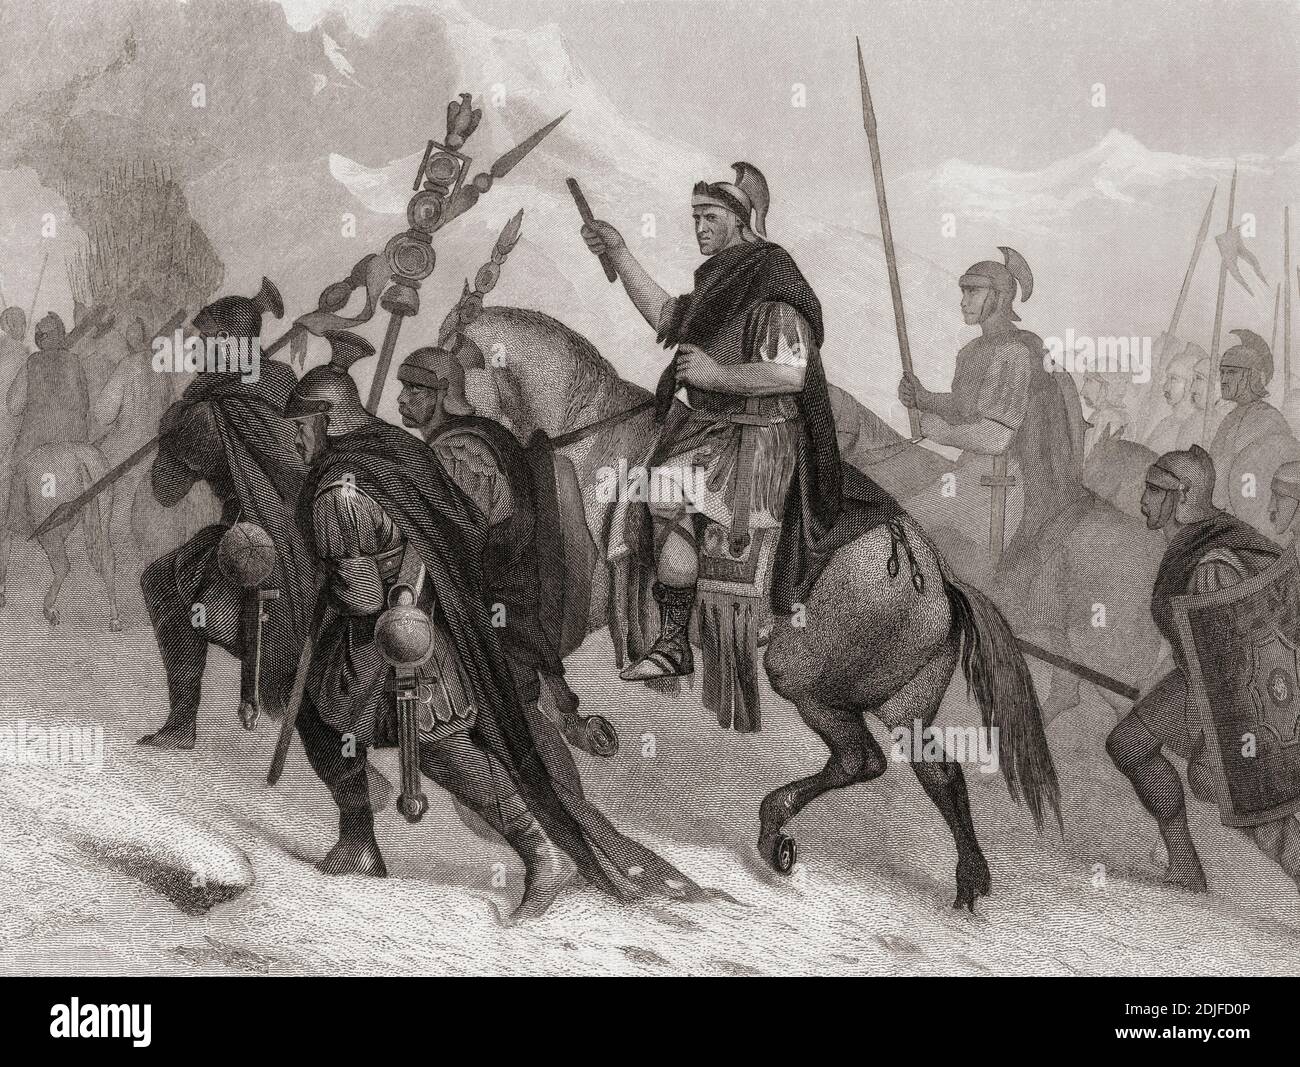 Hannibal crossing the Alps on his overland journey into Italy, 3rd century BC.  Hannibal Barca, 247 – c.183 BC.  Carthaginian general.  Illustration by an unknown 19th century artist after a work by Alonzo Chappel. Stock Photo